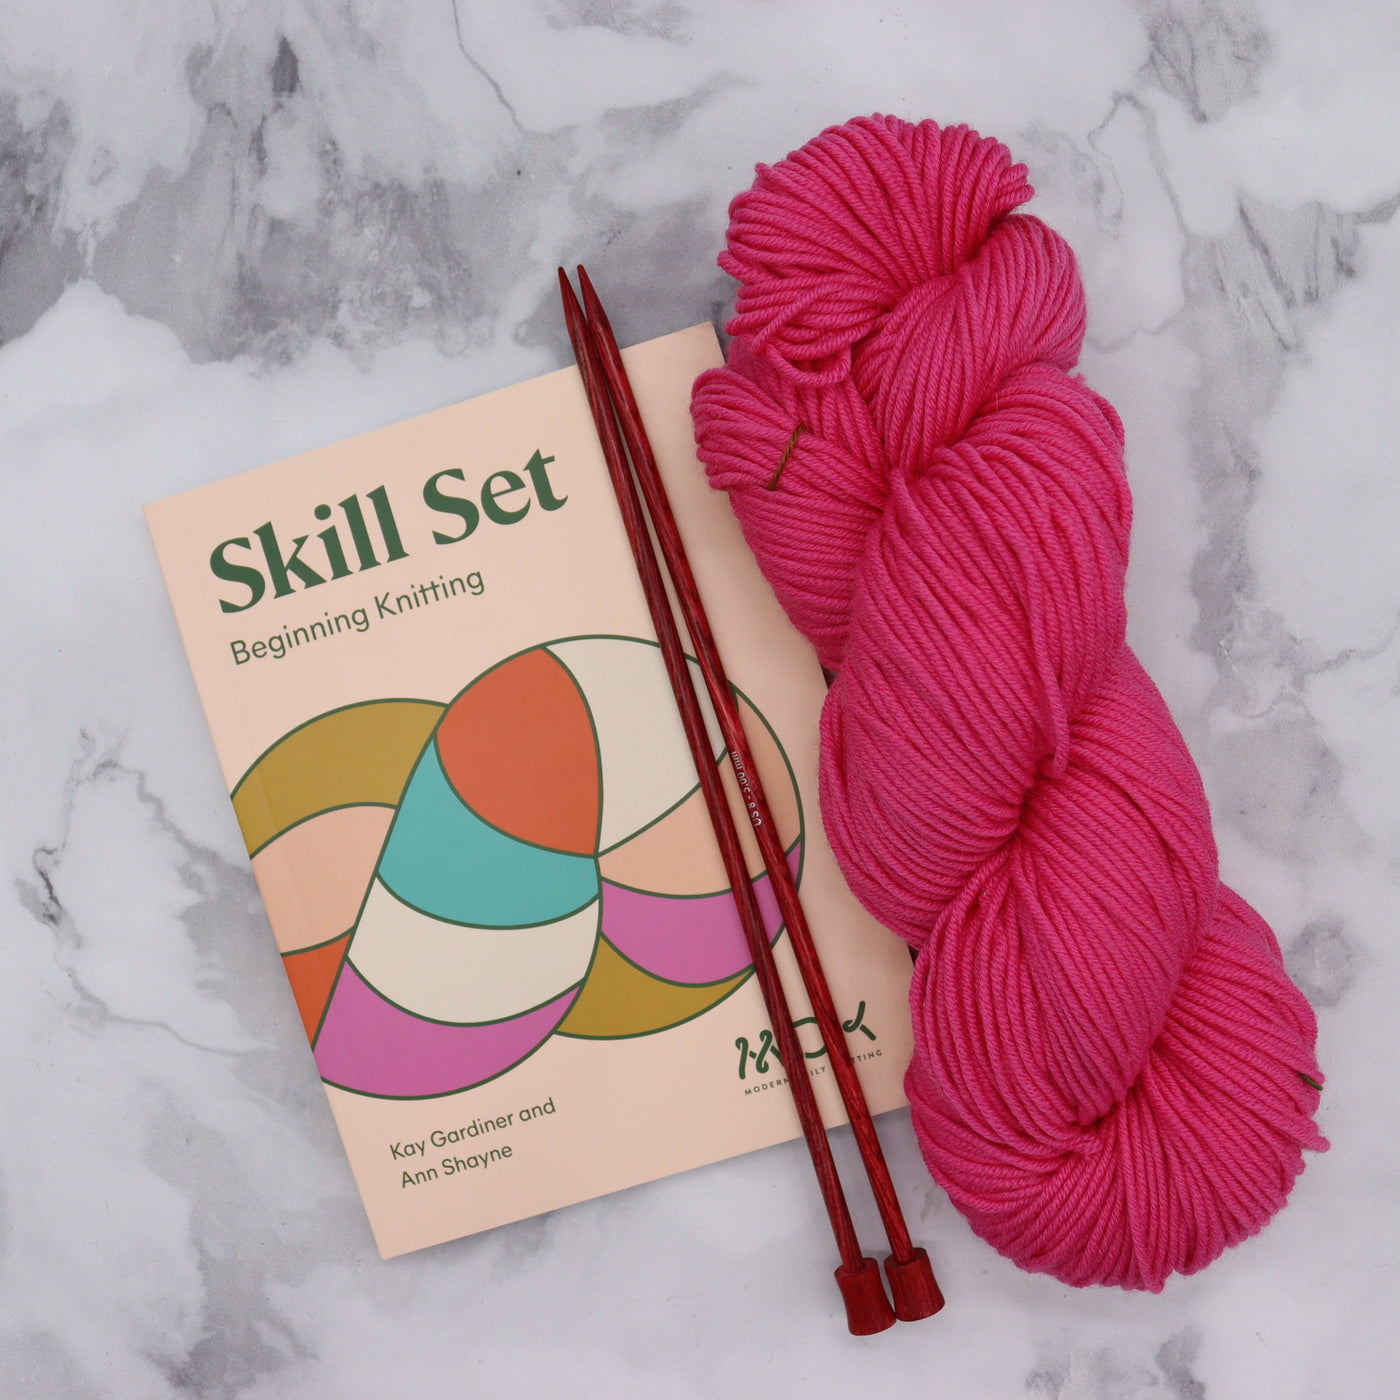 Learn to Knit Kit with Skill Set